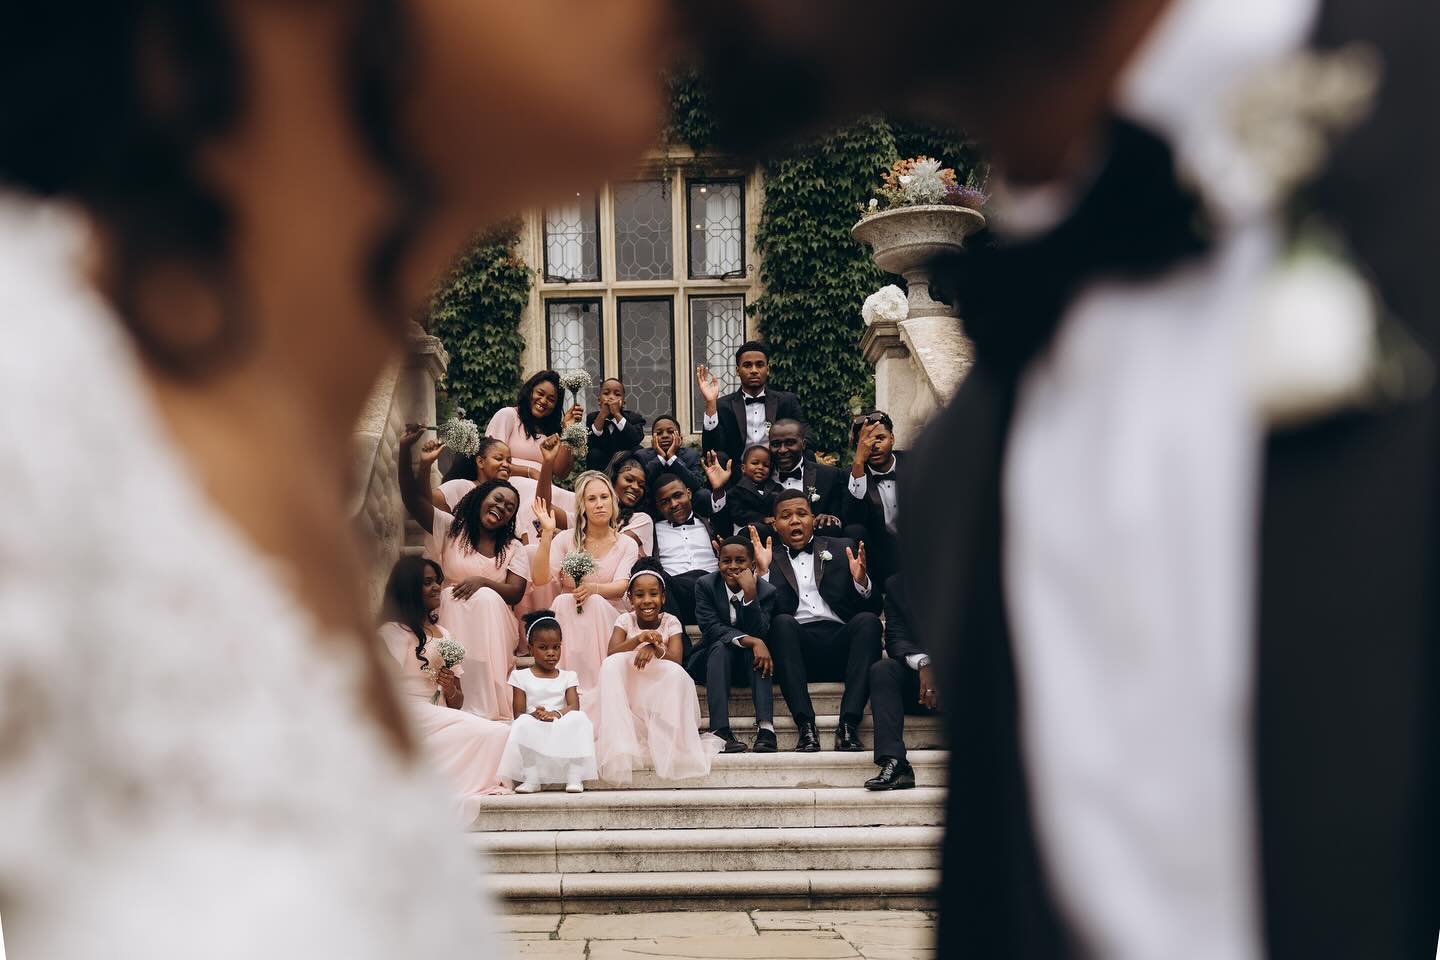 Capturing photos with your guests is just as important as those beautiful shots of the bride and groom

Whether it&rsquo;s a posed picture or a spontaneous one, these are special memories. 

As your wedding photographer, I make sure to capture these 